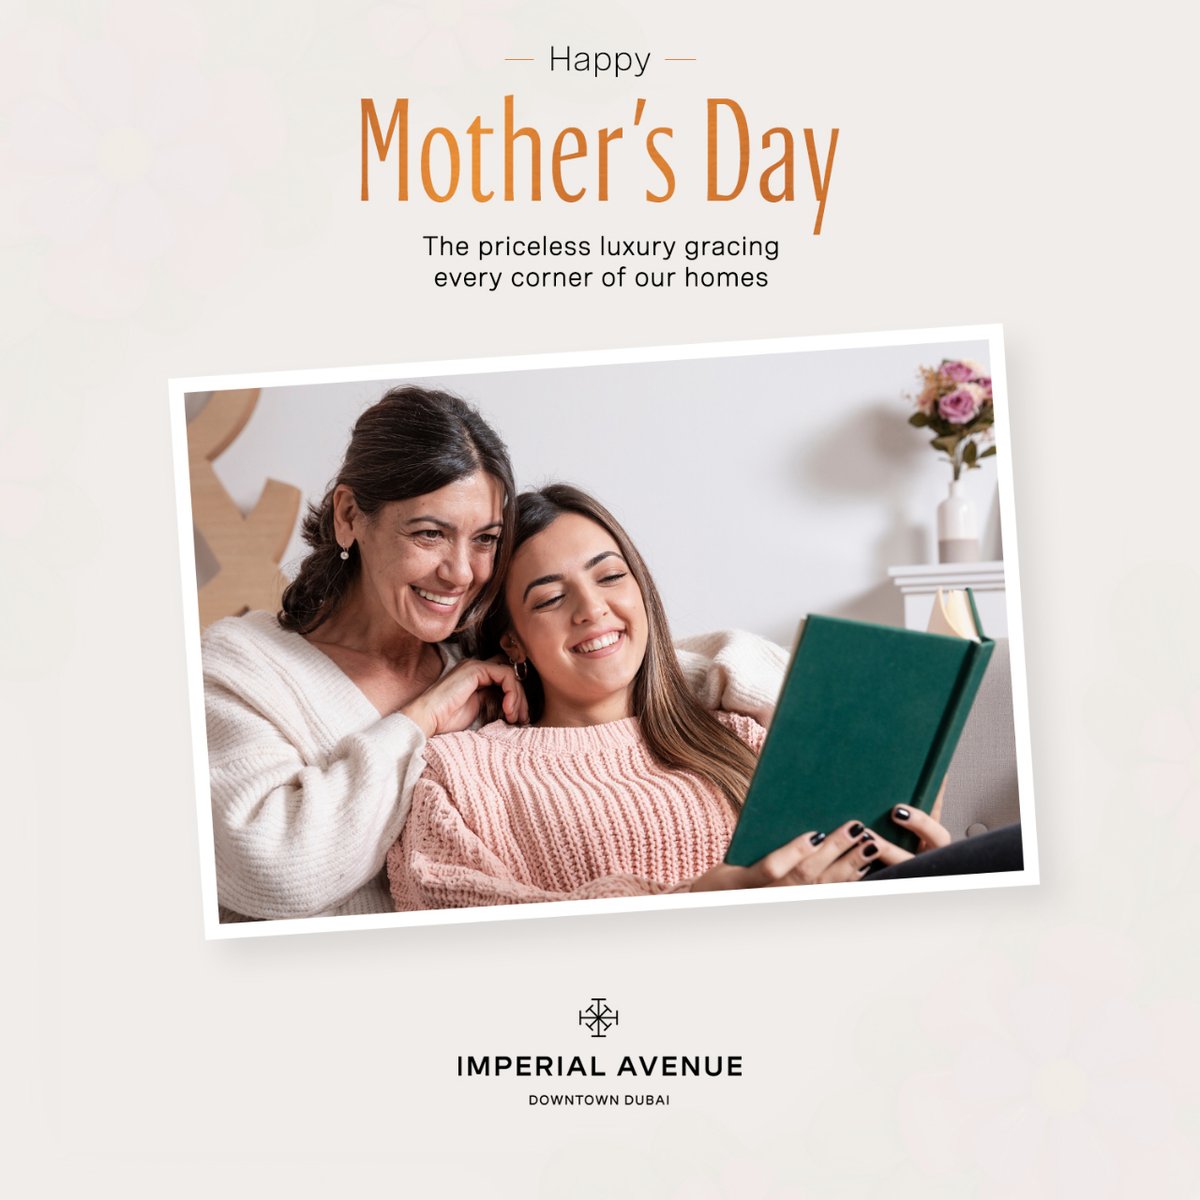 On this Mother's Day, the Shapoorji Pallonji Group extends heartfelt wishes to mothers everywhere, celebrating their enduring strength and nurturing spirit that uplifts families and communities alike.

#mothersday #shapoorjipallonji #dubai #uaerealestate